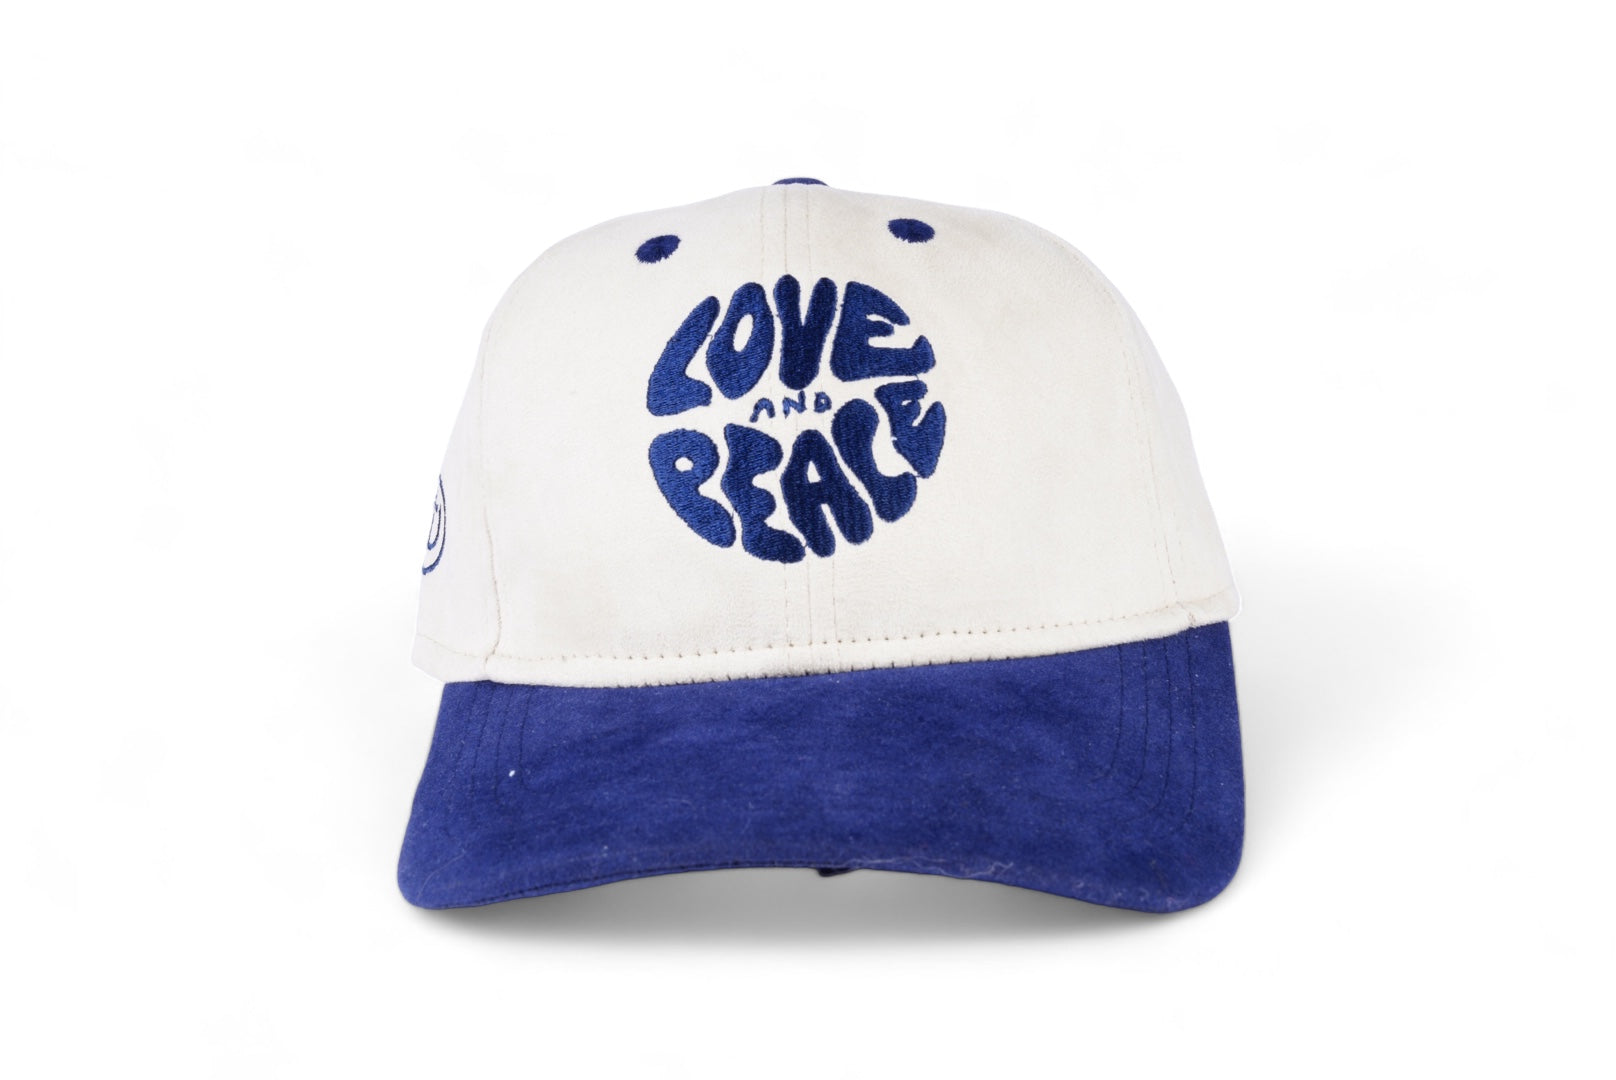 Stylish White and Blue snapback cap made with premium materials made to rock on all occasions, available at Cop Underdog In-store and ready to ship.